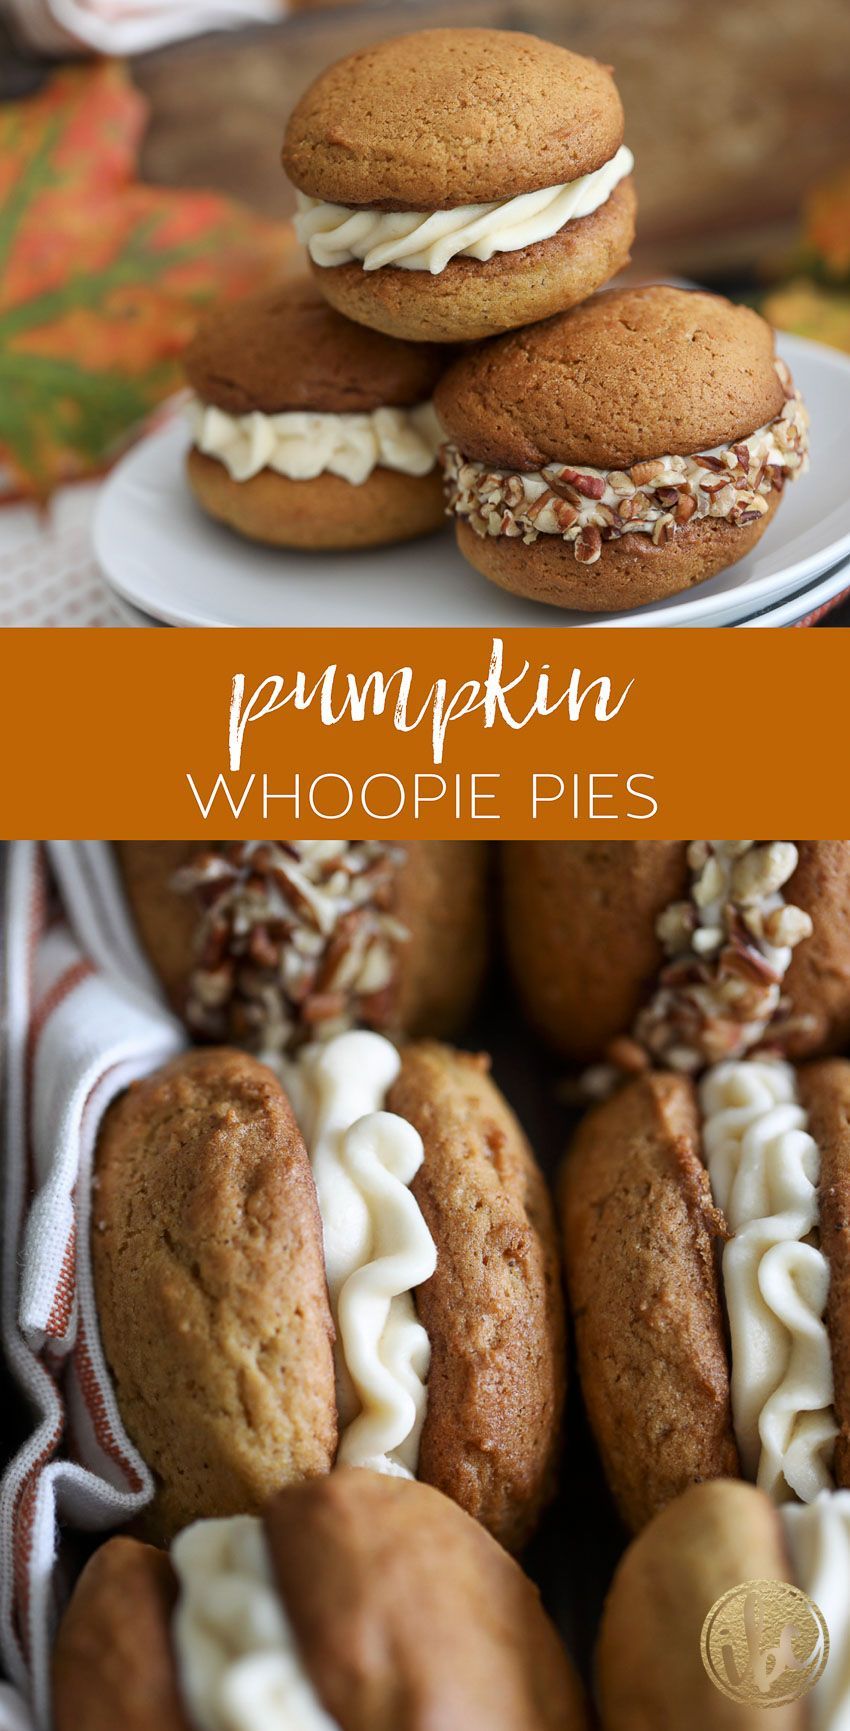 Pumpkin Whoopie Pies with Salted Caramel Cream Cheese Frosting -   21 baking recipes pie
 ideas